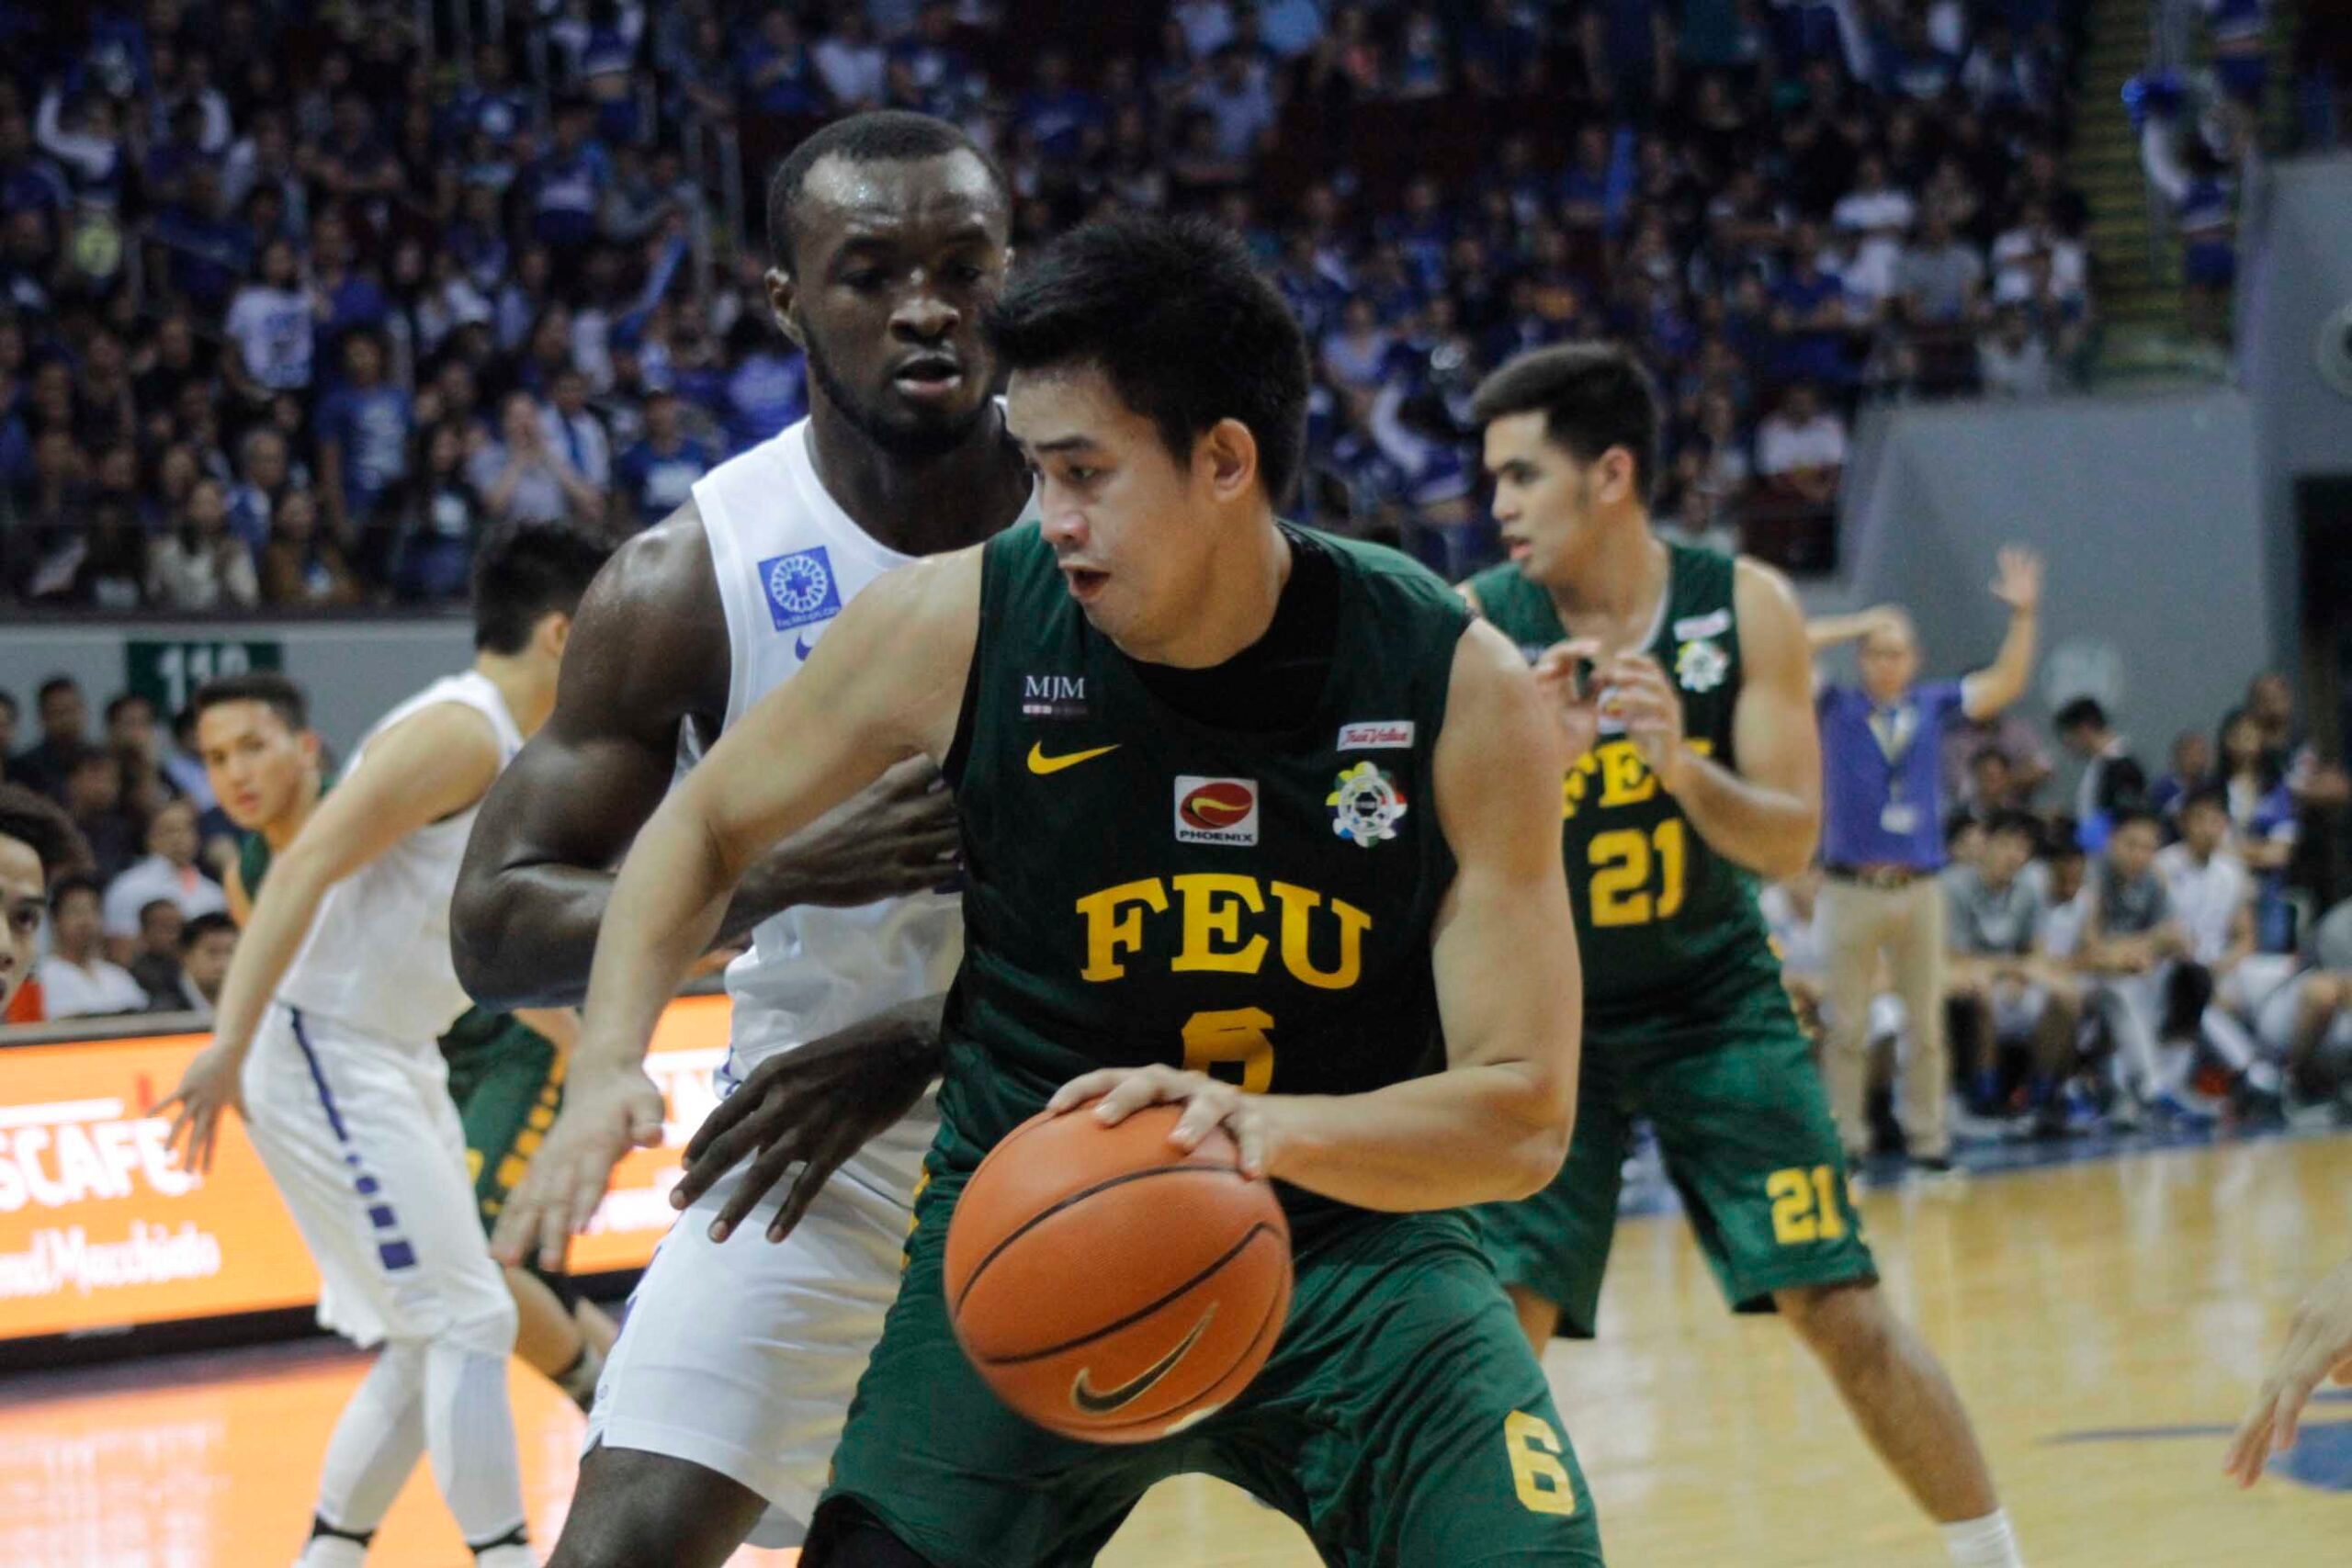 Racela, Arong, Jose not ready to leave FEU just yet